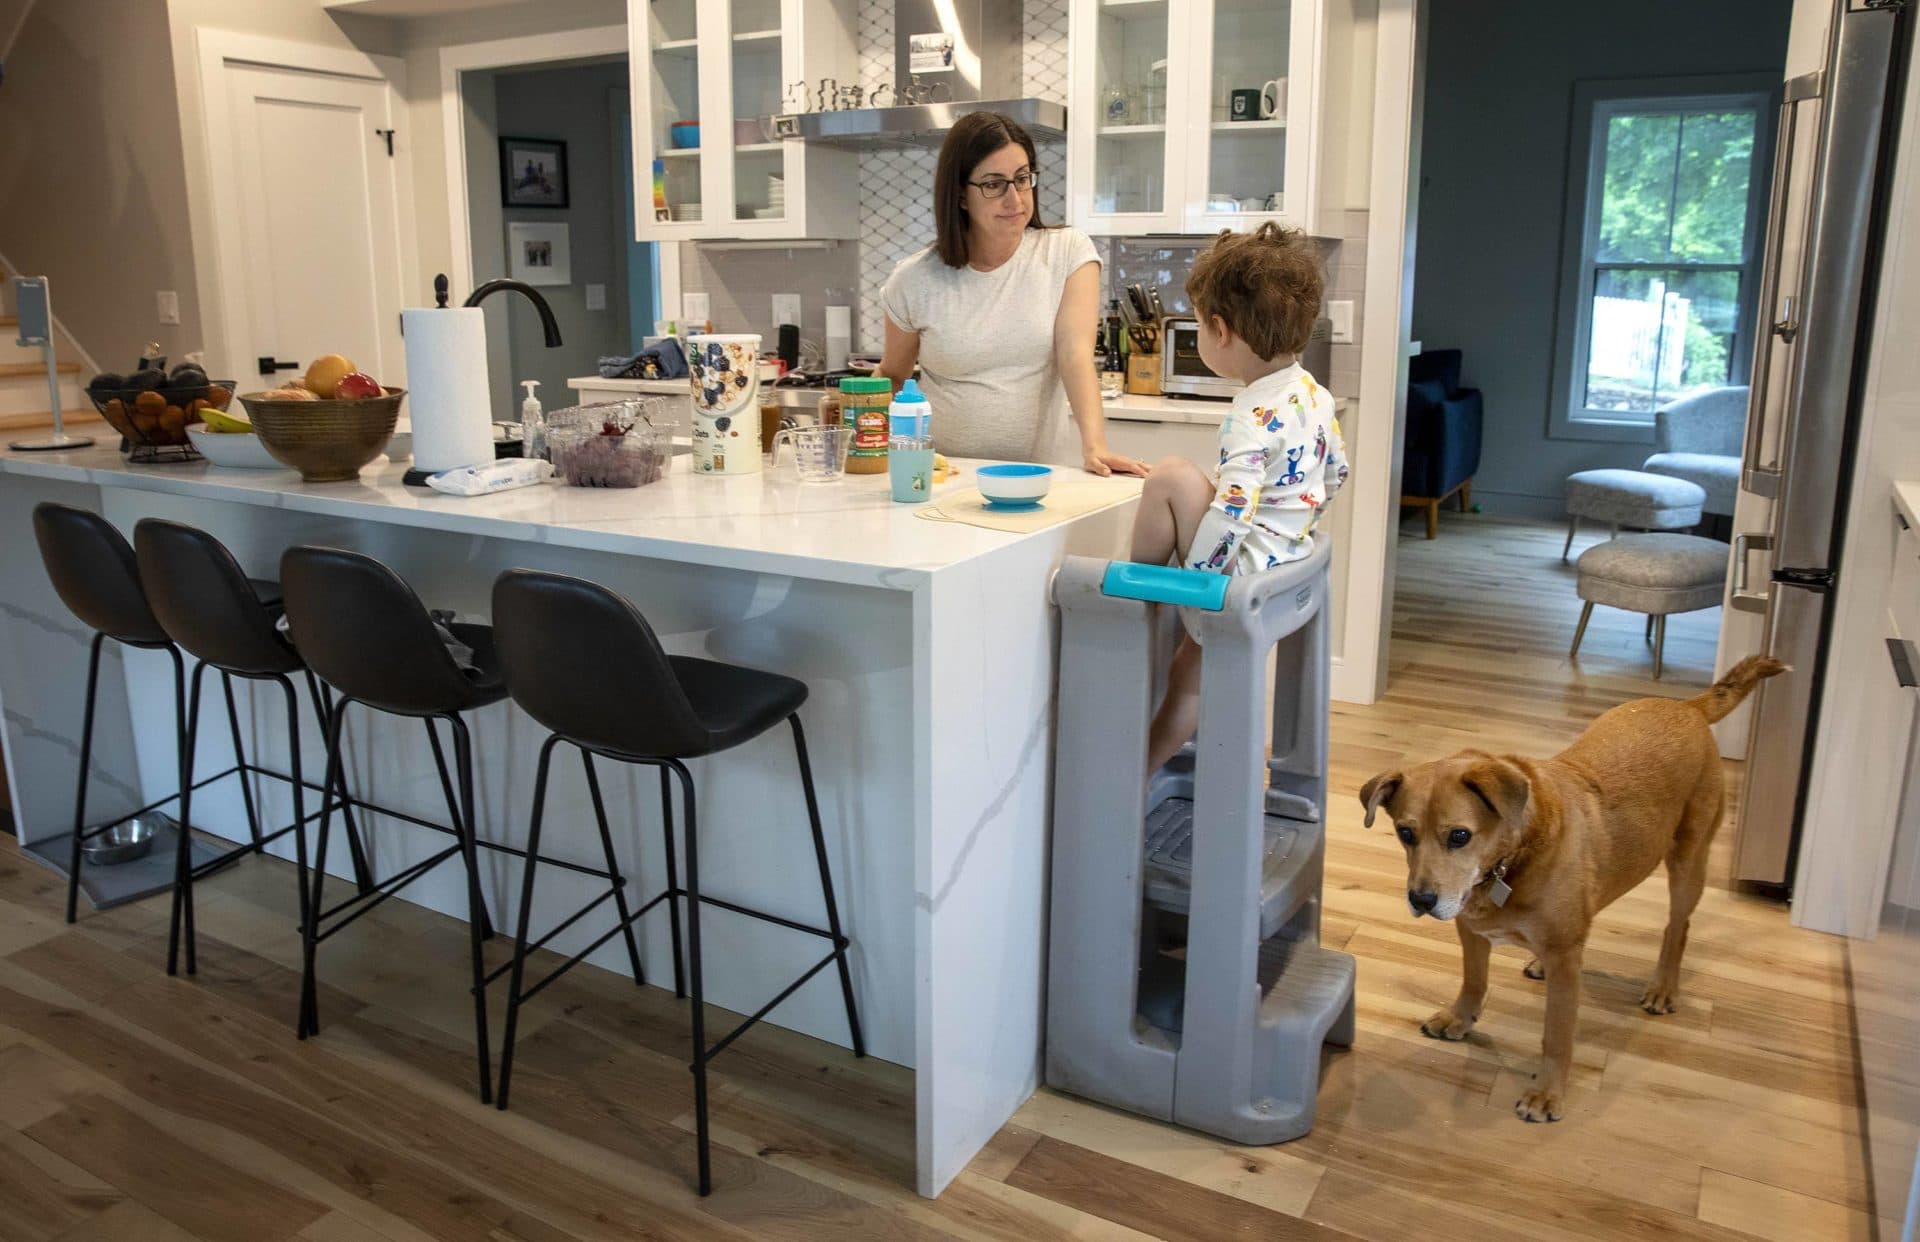 Foster, the dog, joins Sarah Berkley and Cole as they have breakfast. (Robin Lubbock/WBUR)